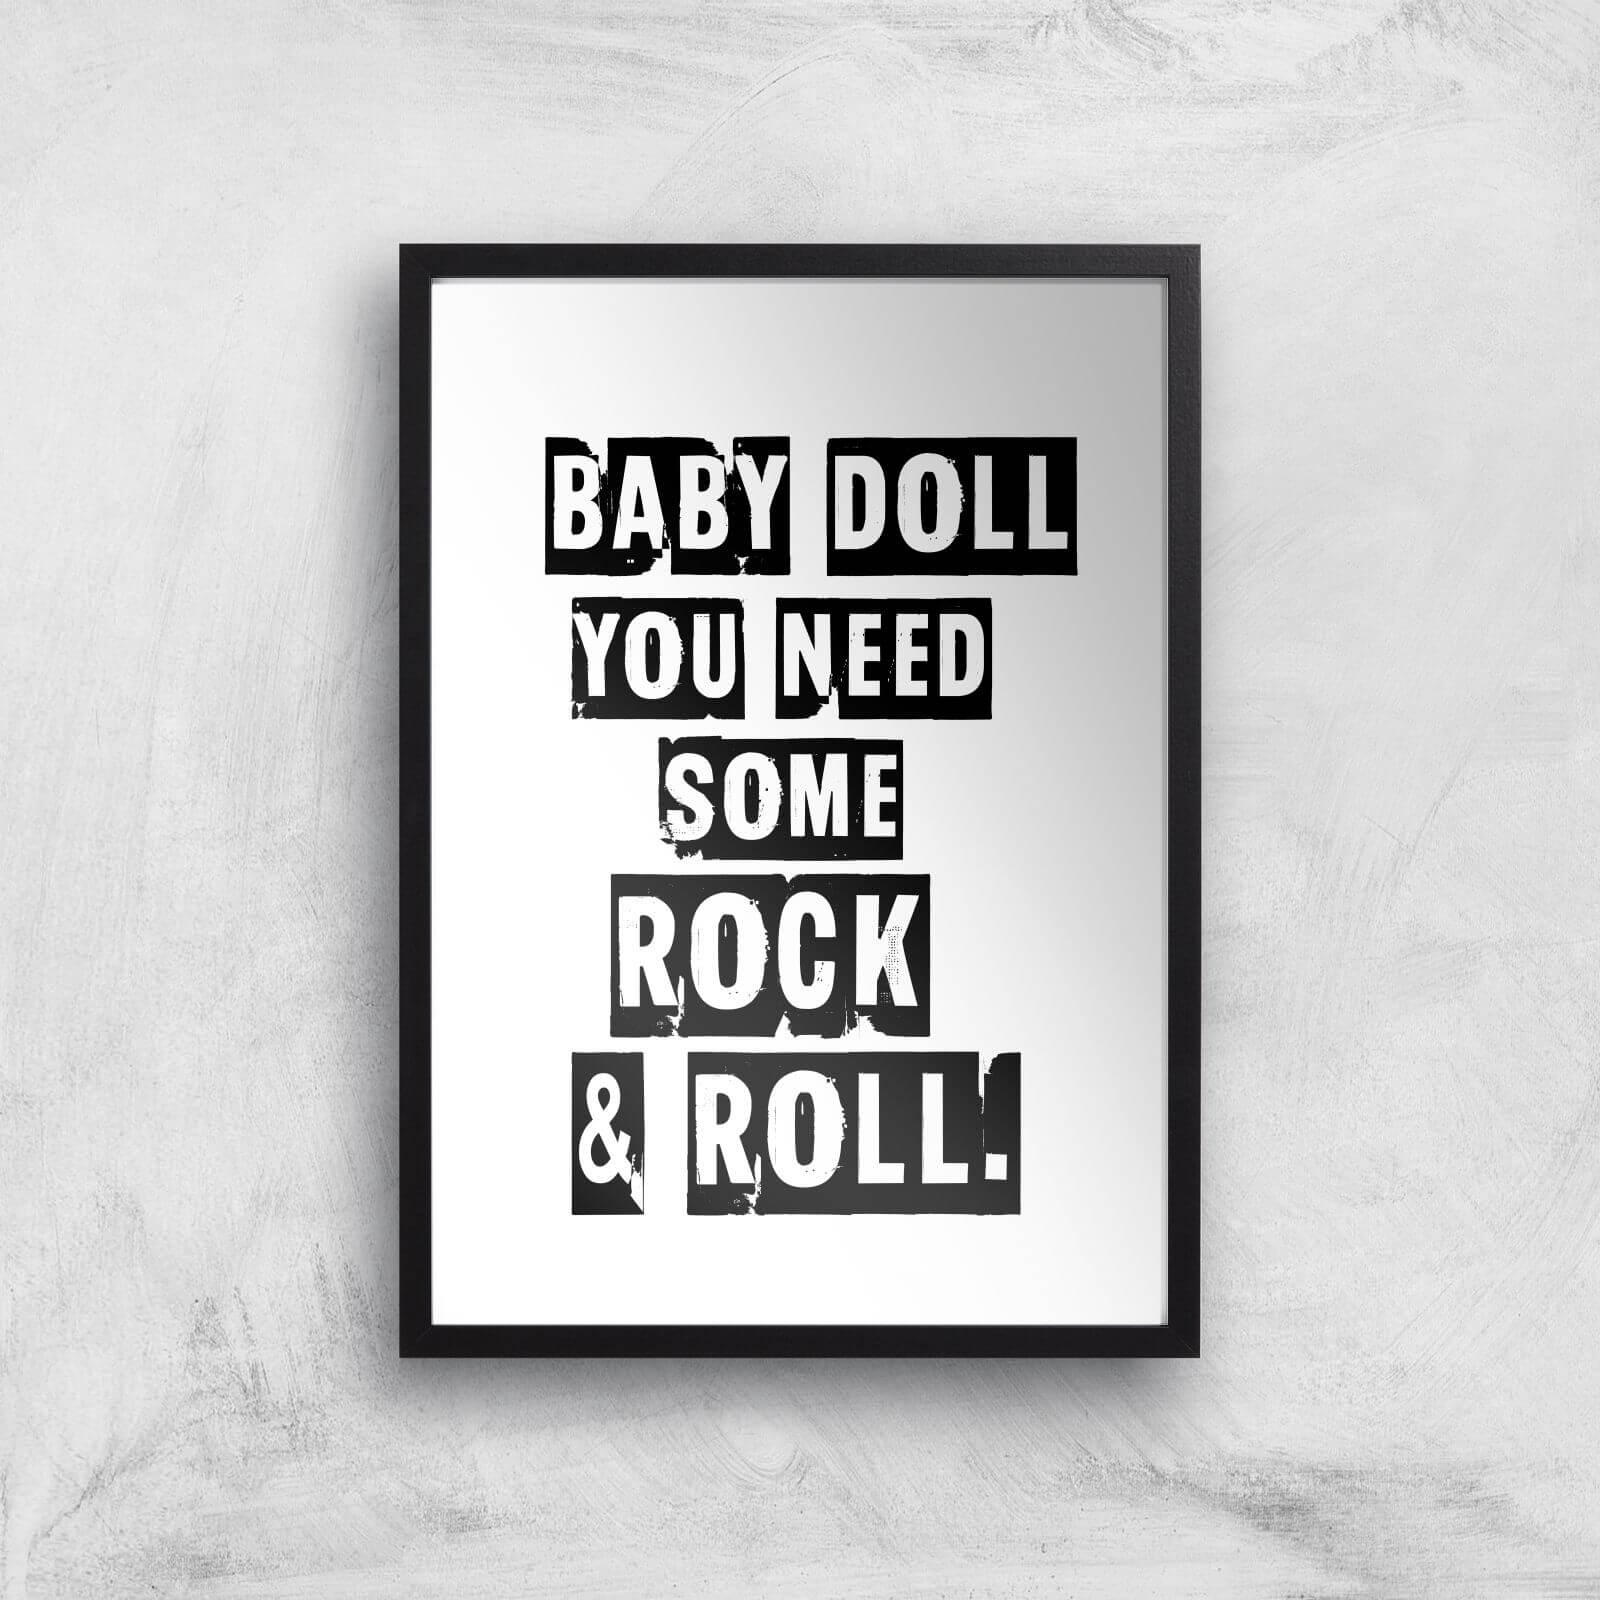 Baby Doll You Need Some Rock & Roll Giclee Art Print - A2 - Black Frame